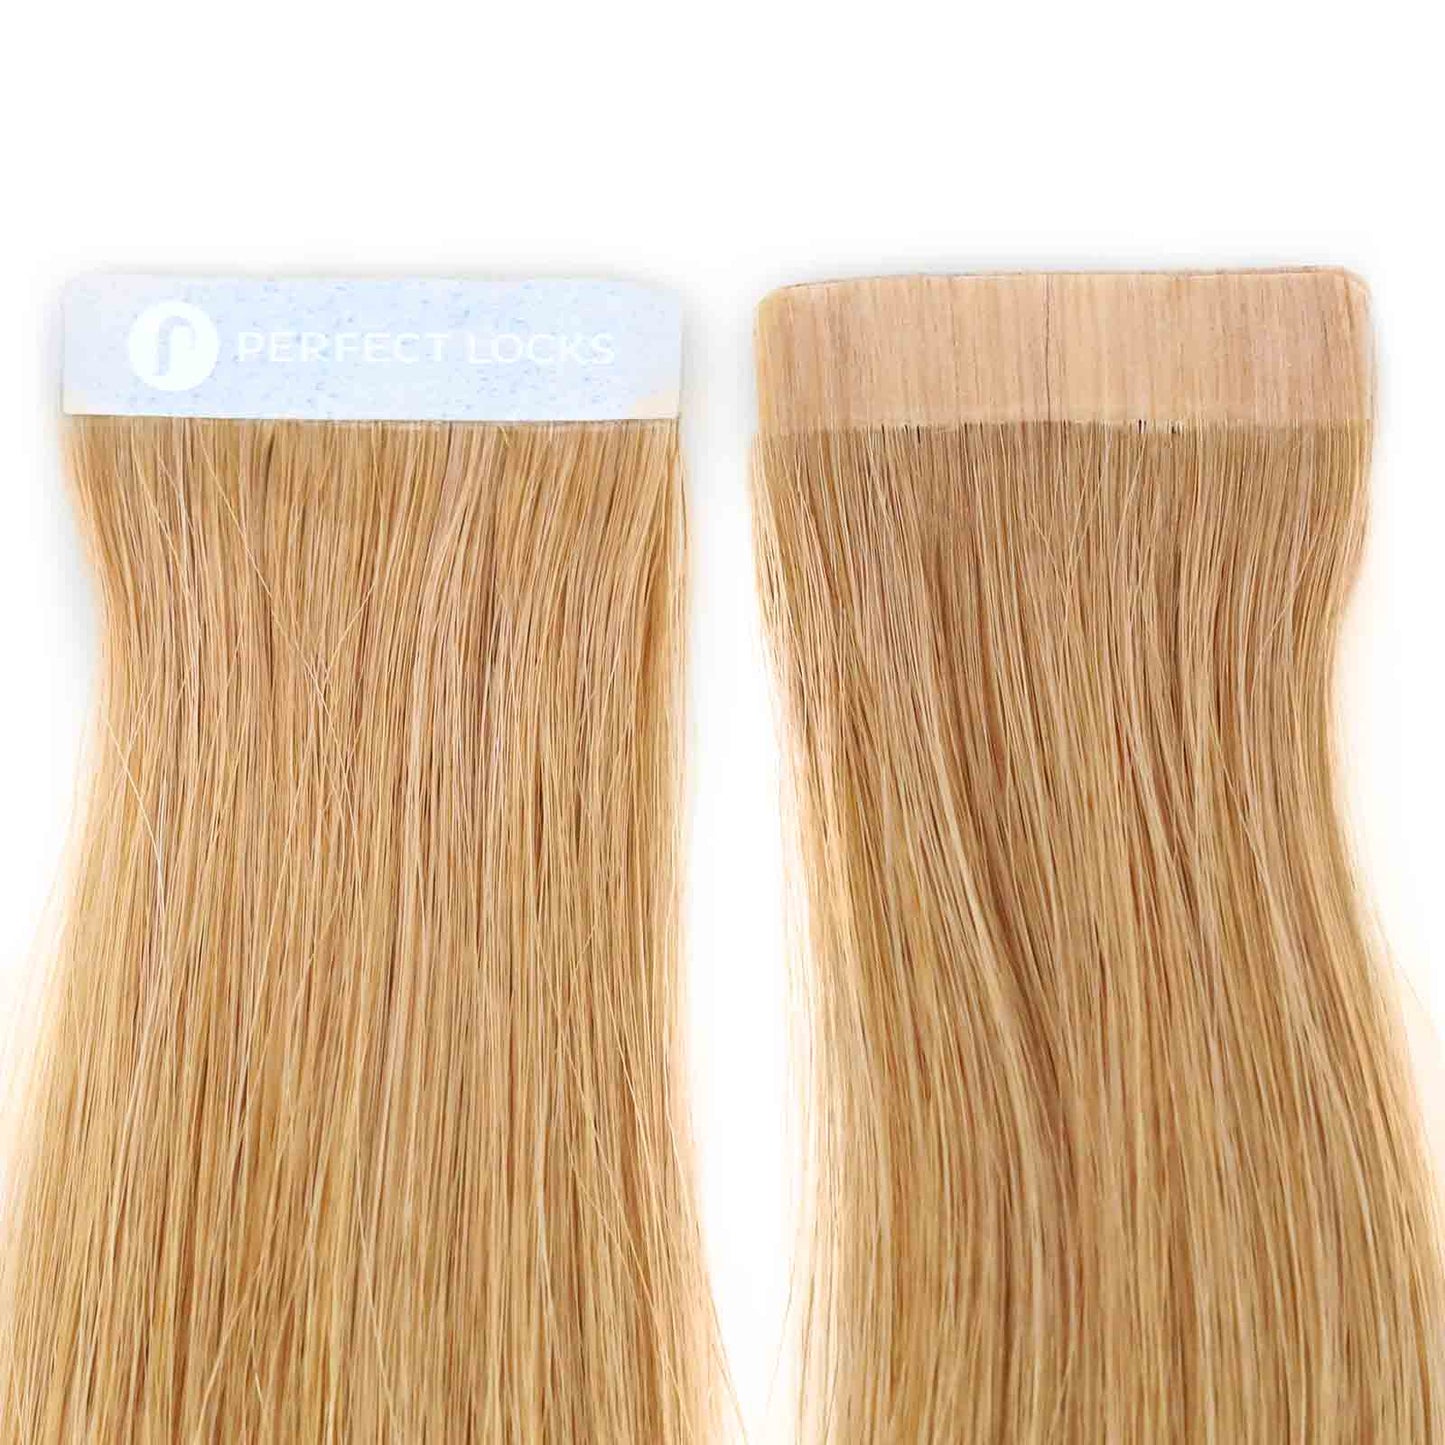 4 x Wavy Tape-In Hair Extension Bundle Deal (40 Pieces)